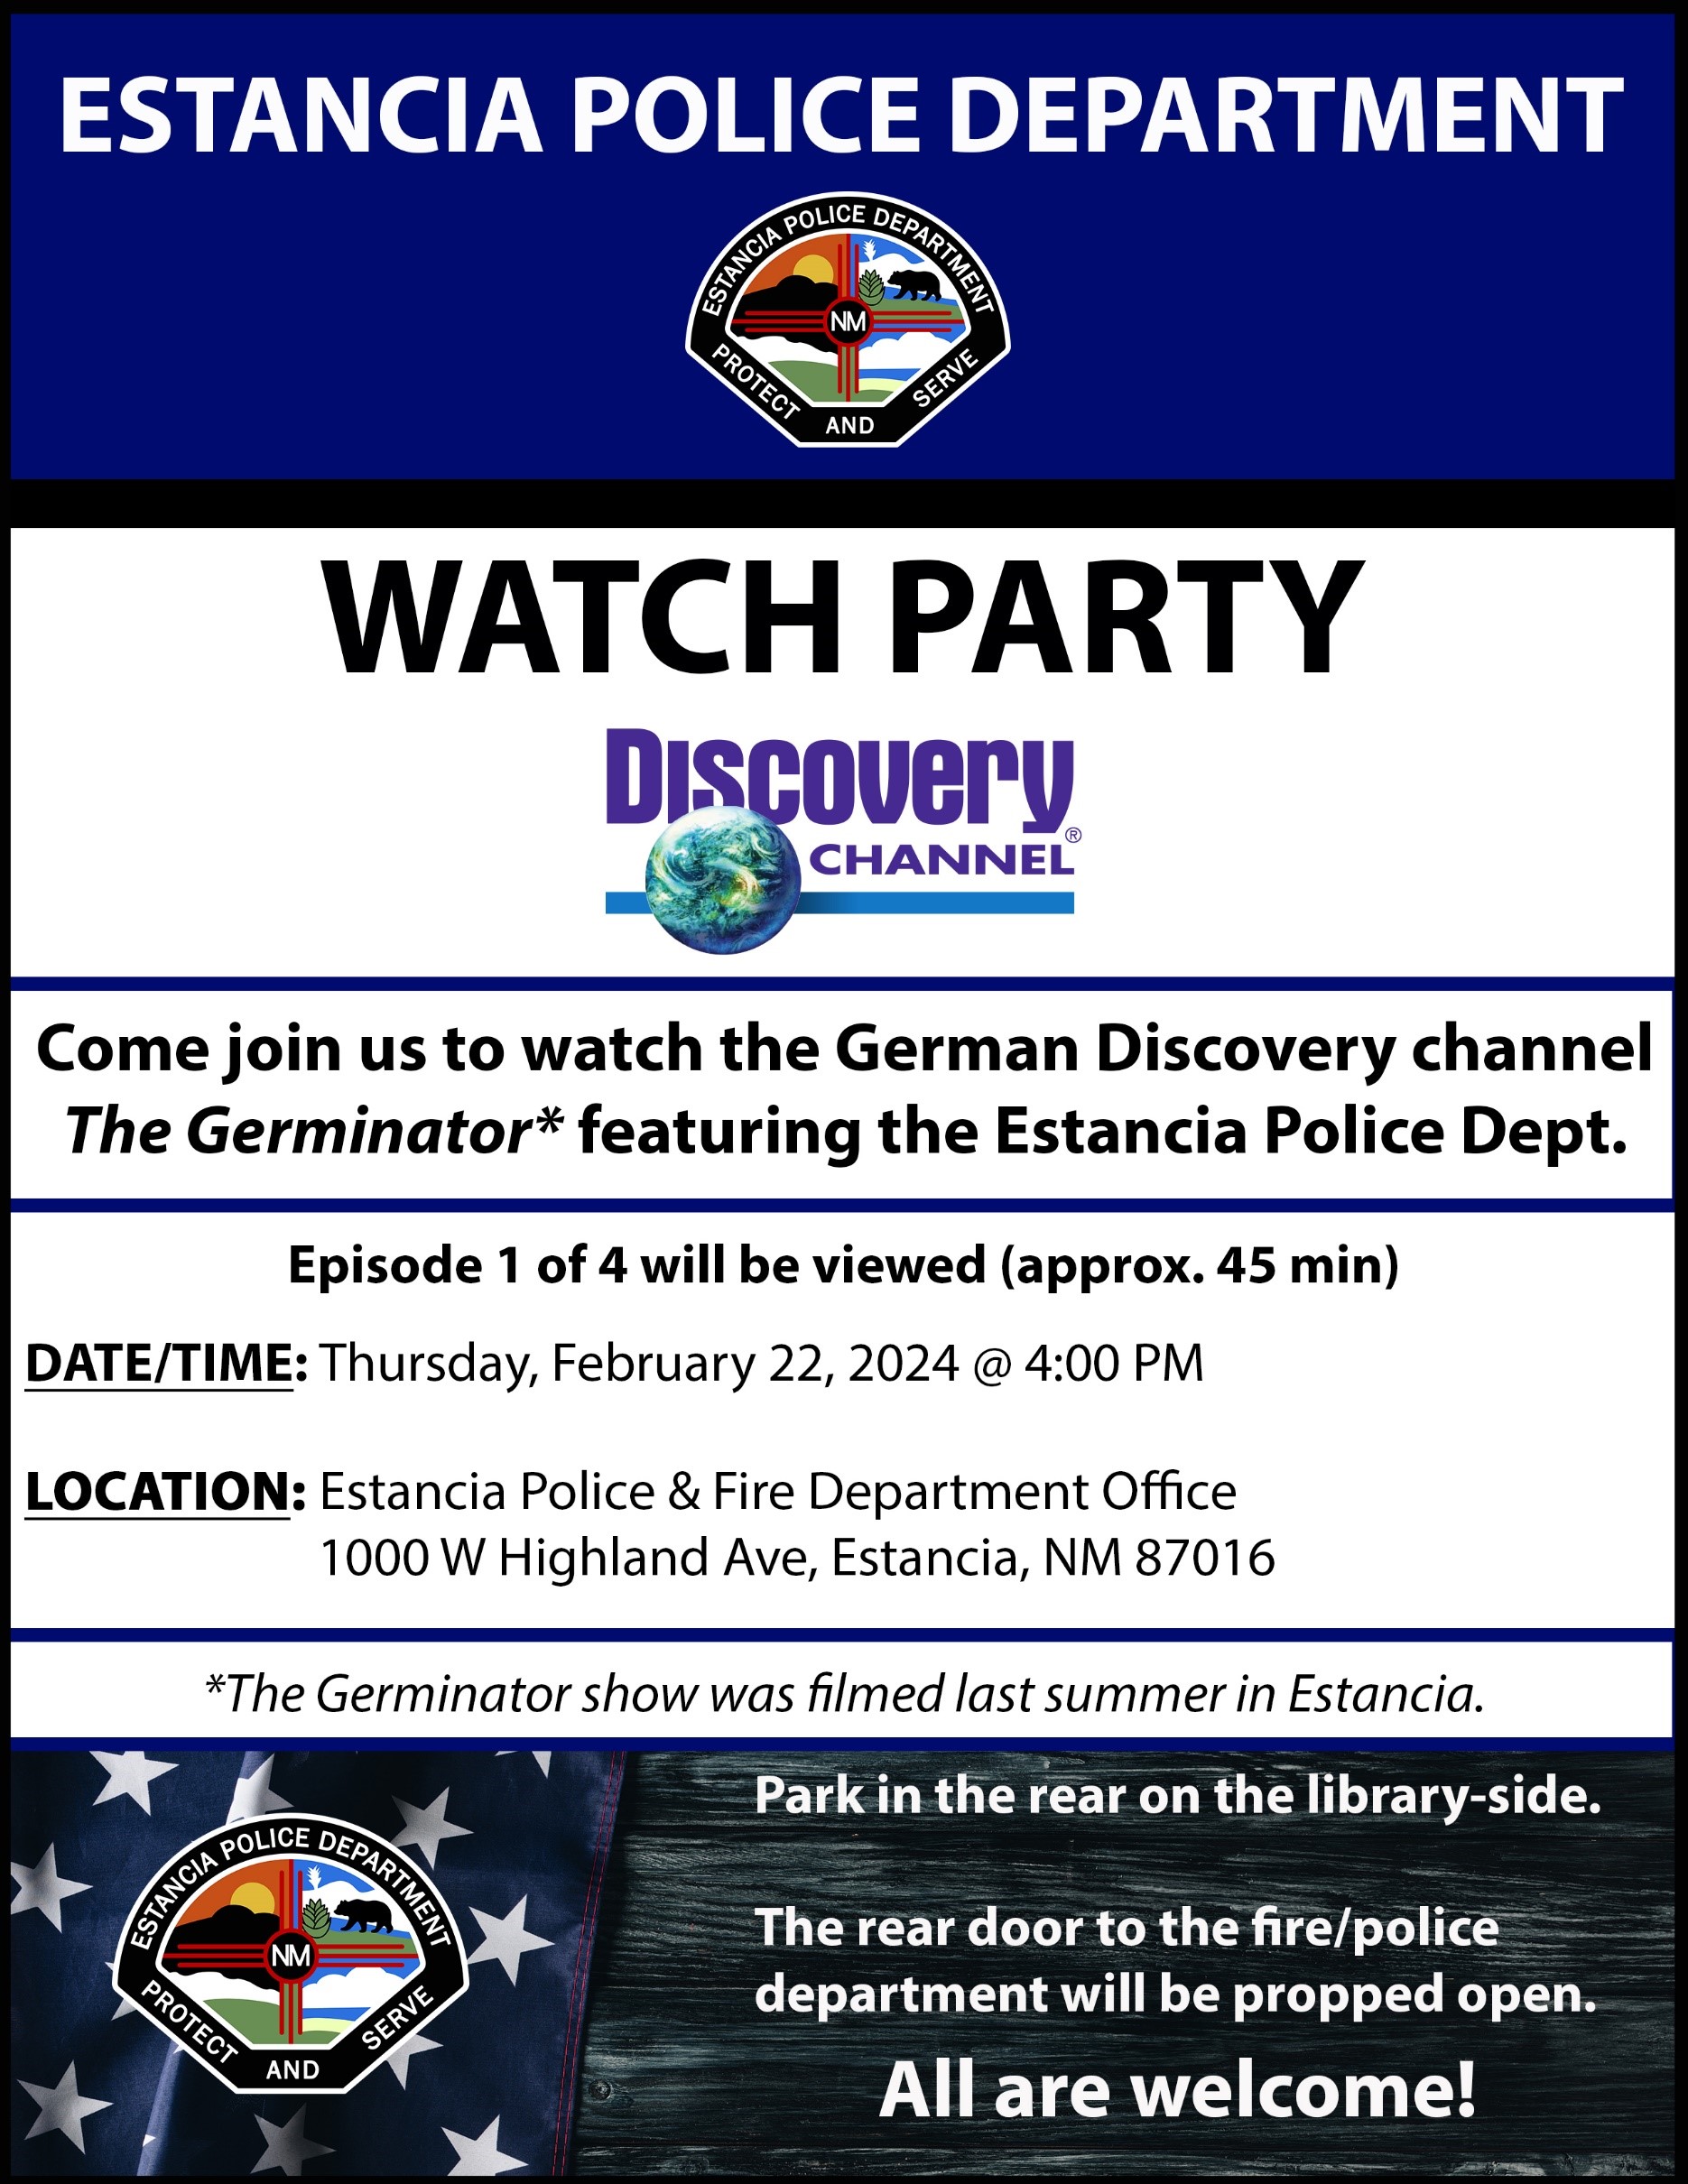 Estancia Police Department Watch Party image